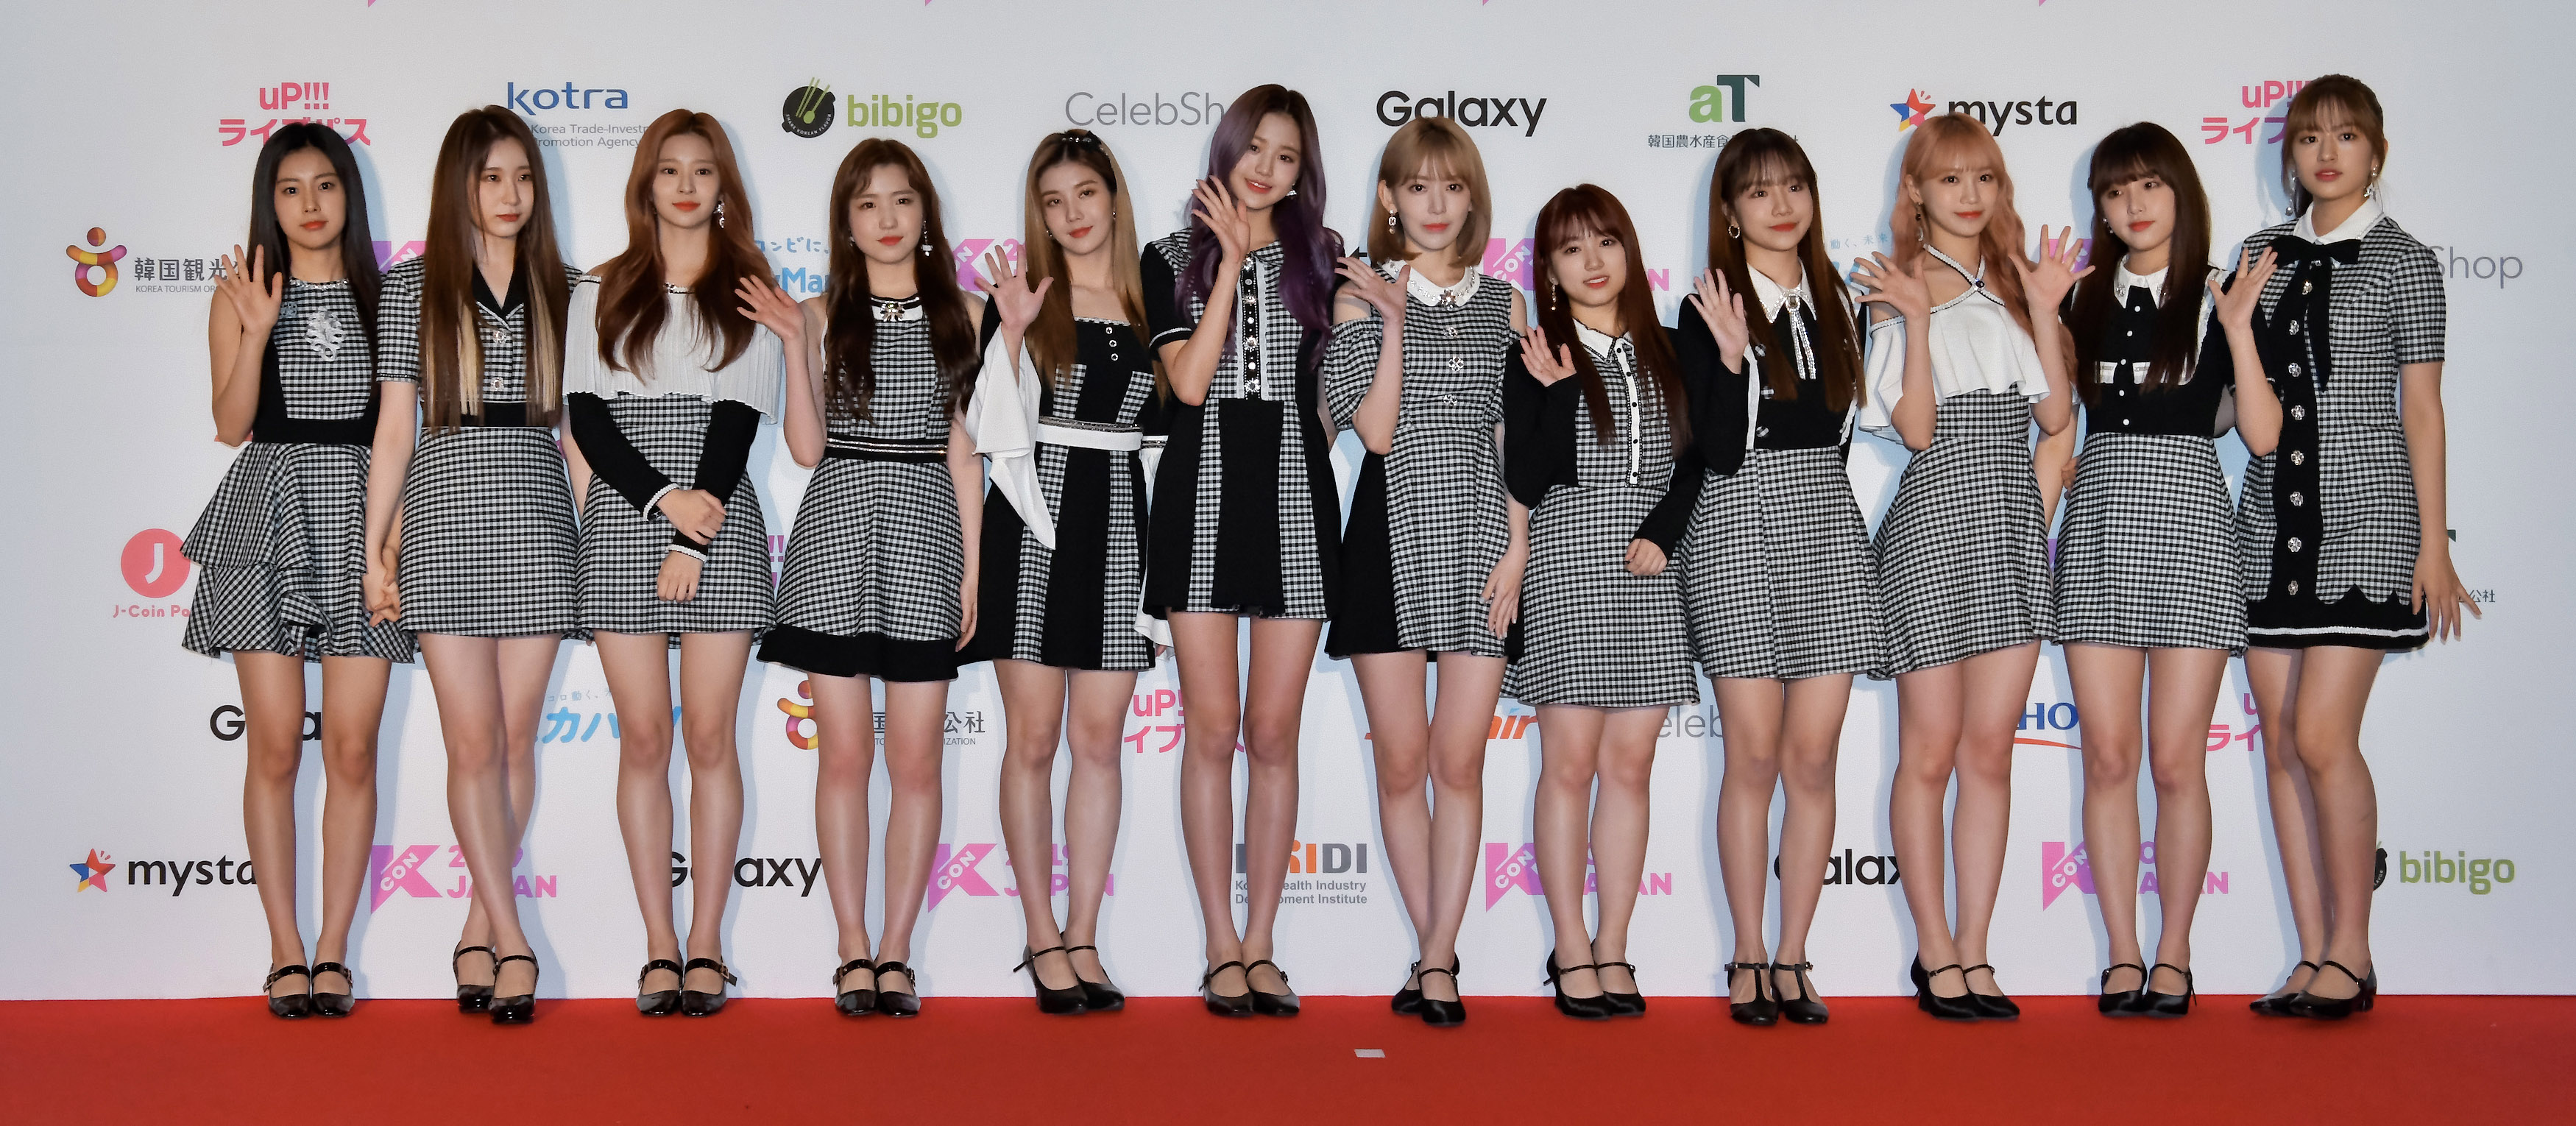 Where Are IZ*ONE Members Now? K-Pop Groups, Solo Careers